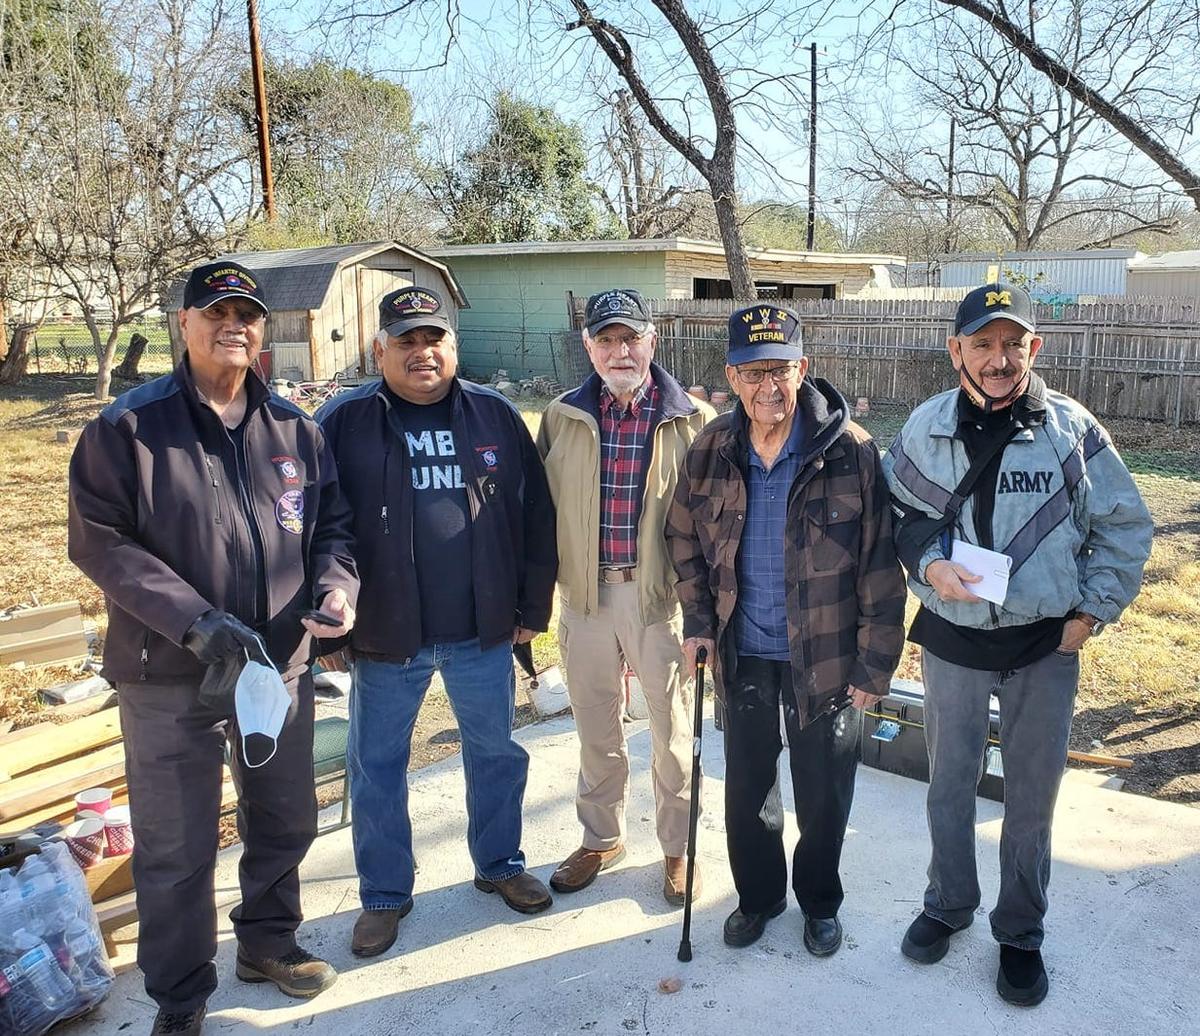 Alfred Guerra (second from right) with veterans from the Purple Heart team, First Baptist Church of San Antonio, and Broken Warriors' Angels. (Courtesy of <a href="https://www.facebook.com/soldiersforchrist12">Fred Alvarado</a>)